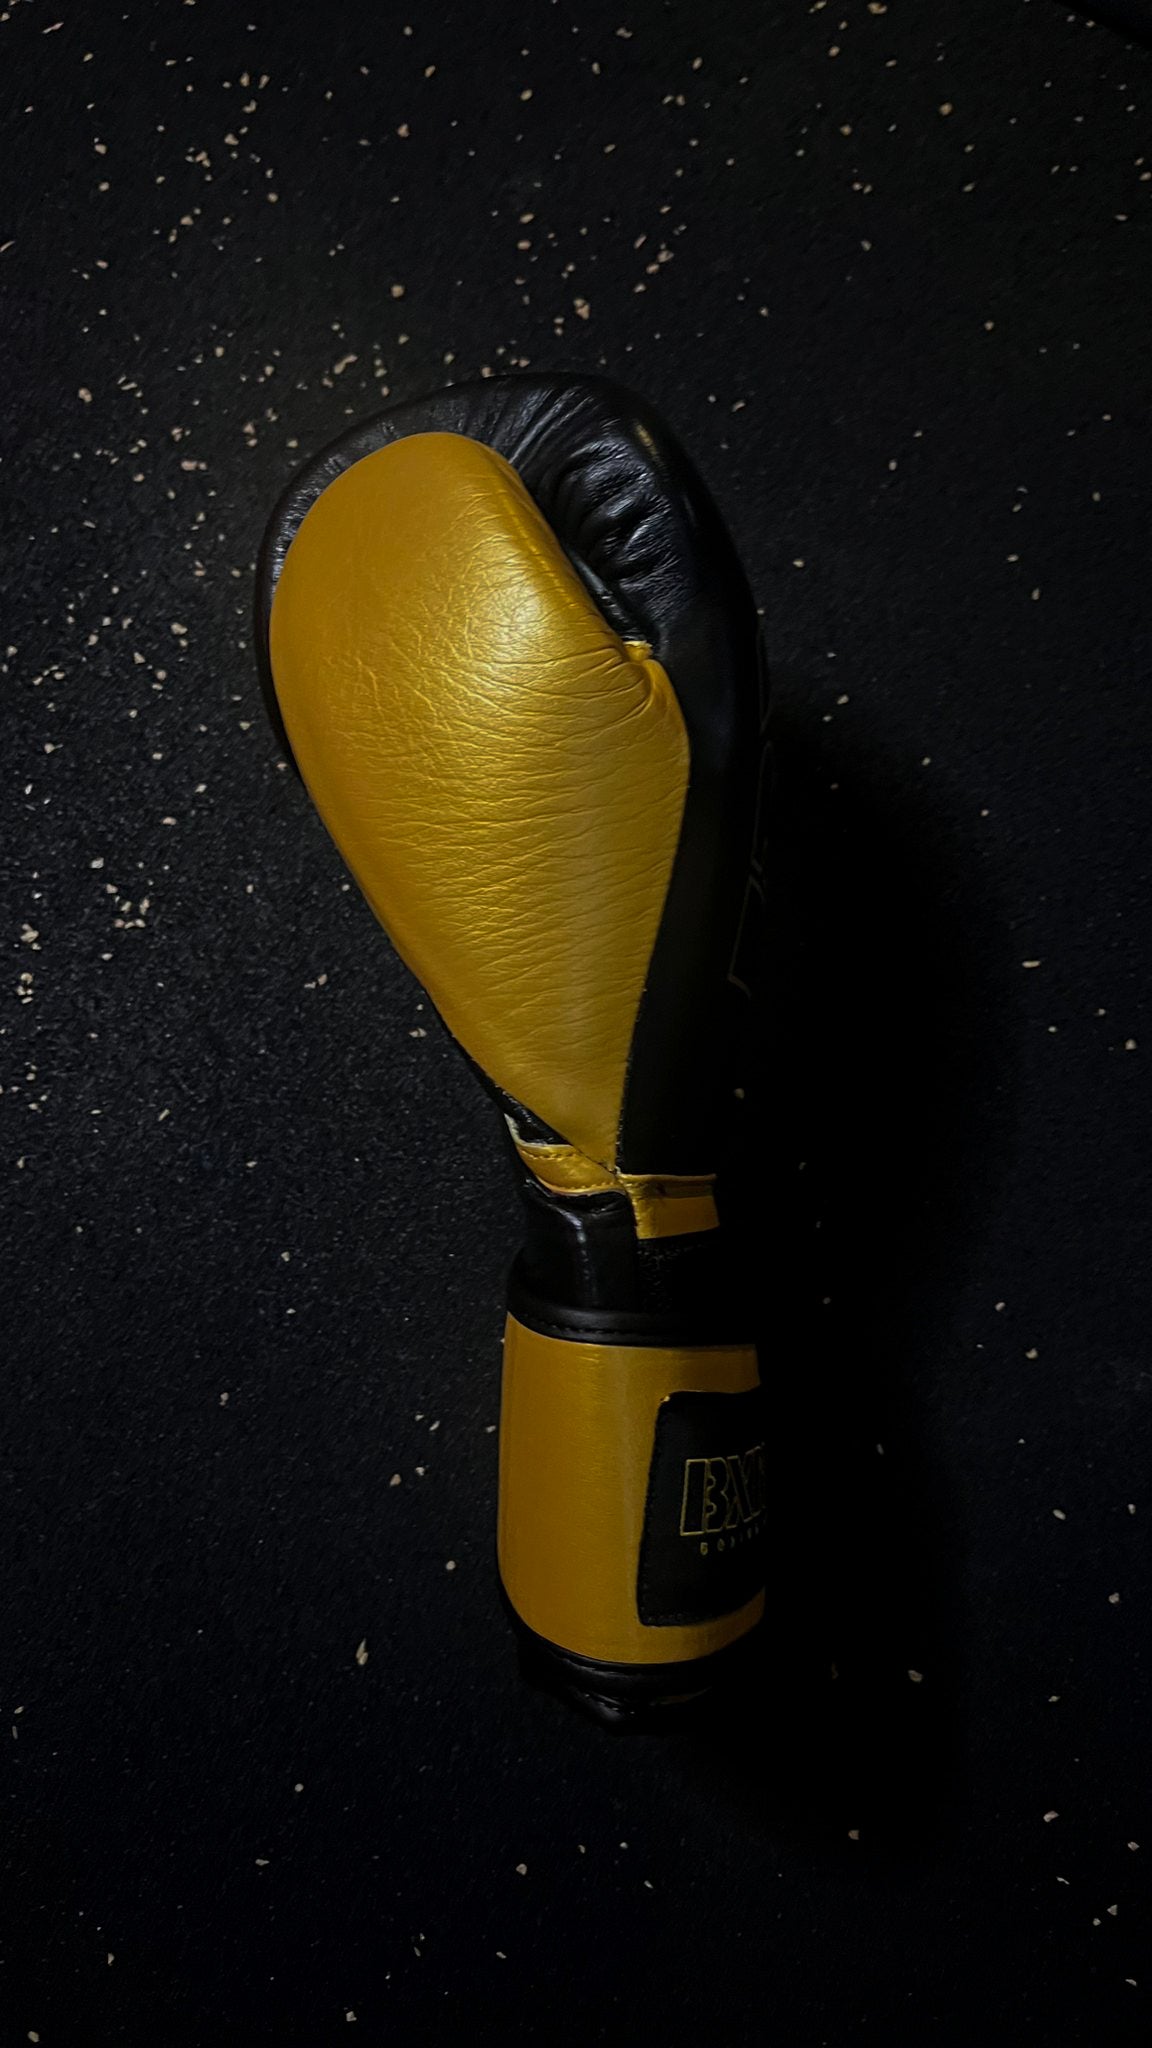 BXNG 1st Generation boxing gloves | Genuine Leather